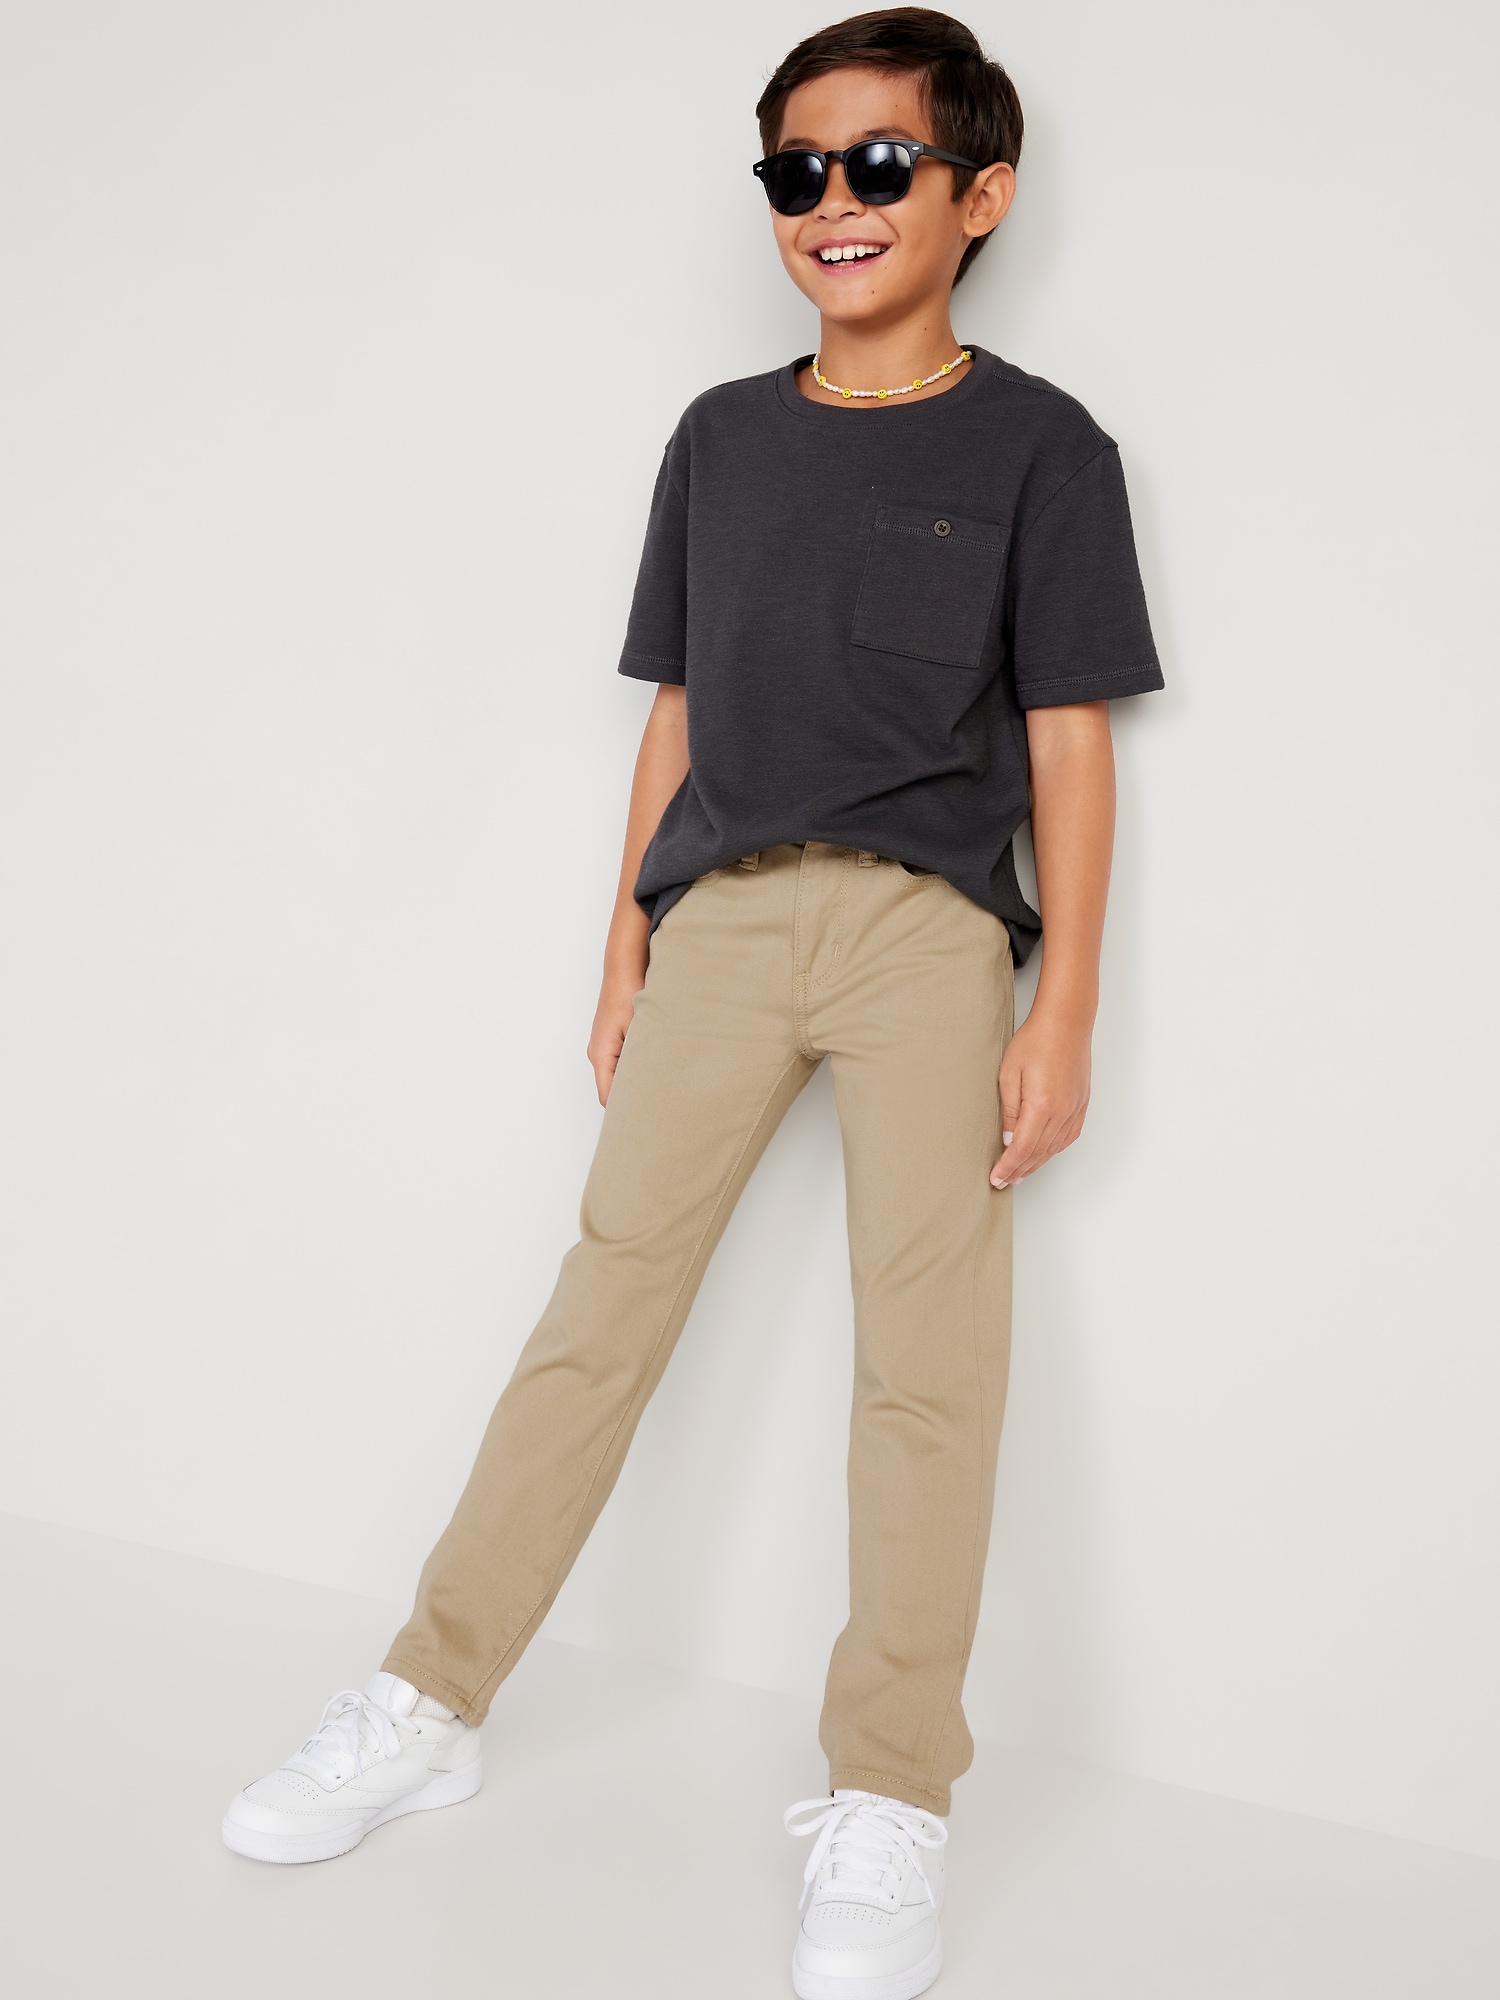 Slim 360° Stretch Twill Pants for Boys | Old Navy